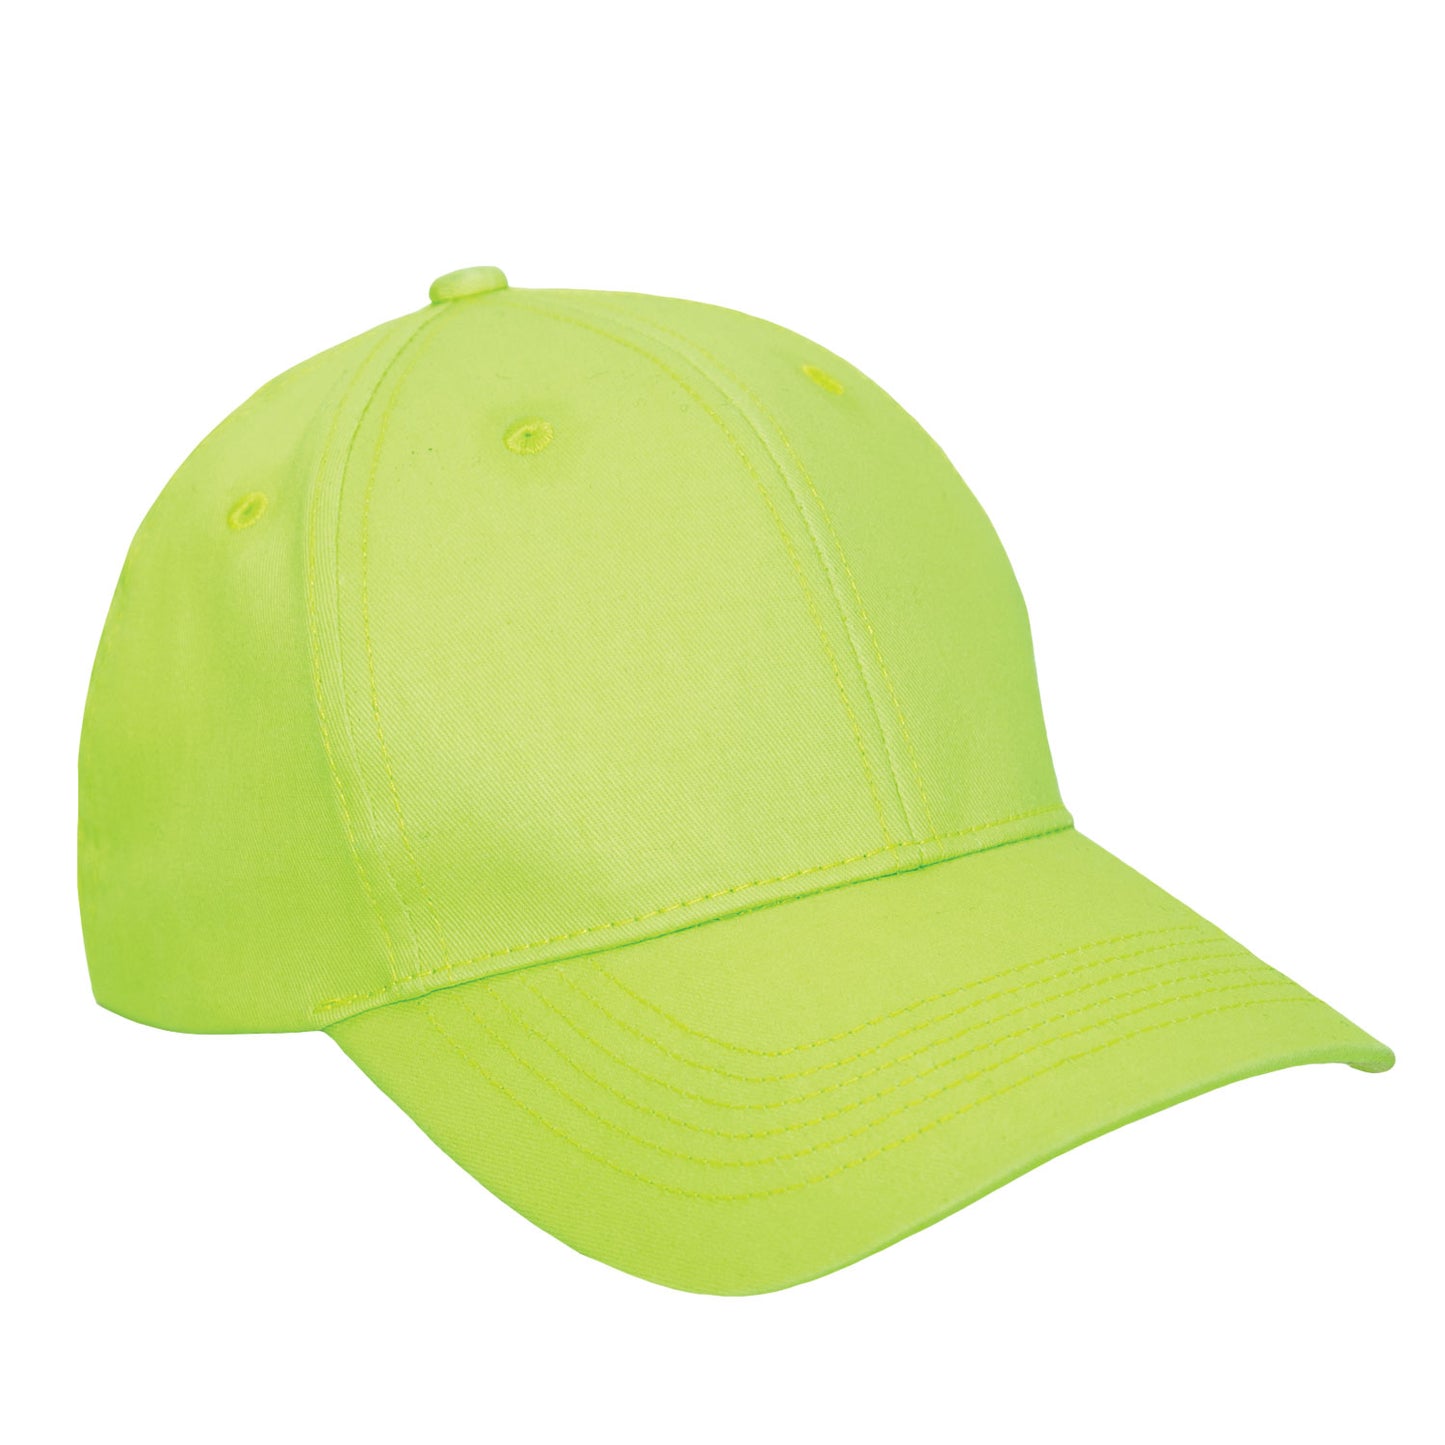 Safety Green Adjustable Baseball Hat - Rothco Solid Color Mid-Low Profile Cap